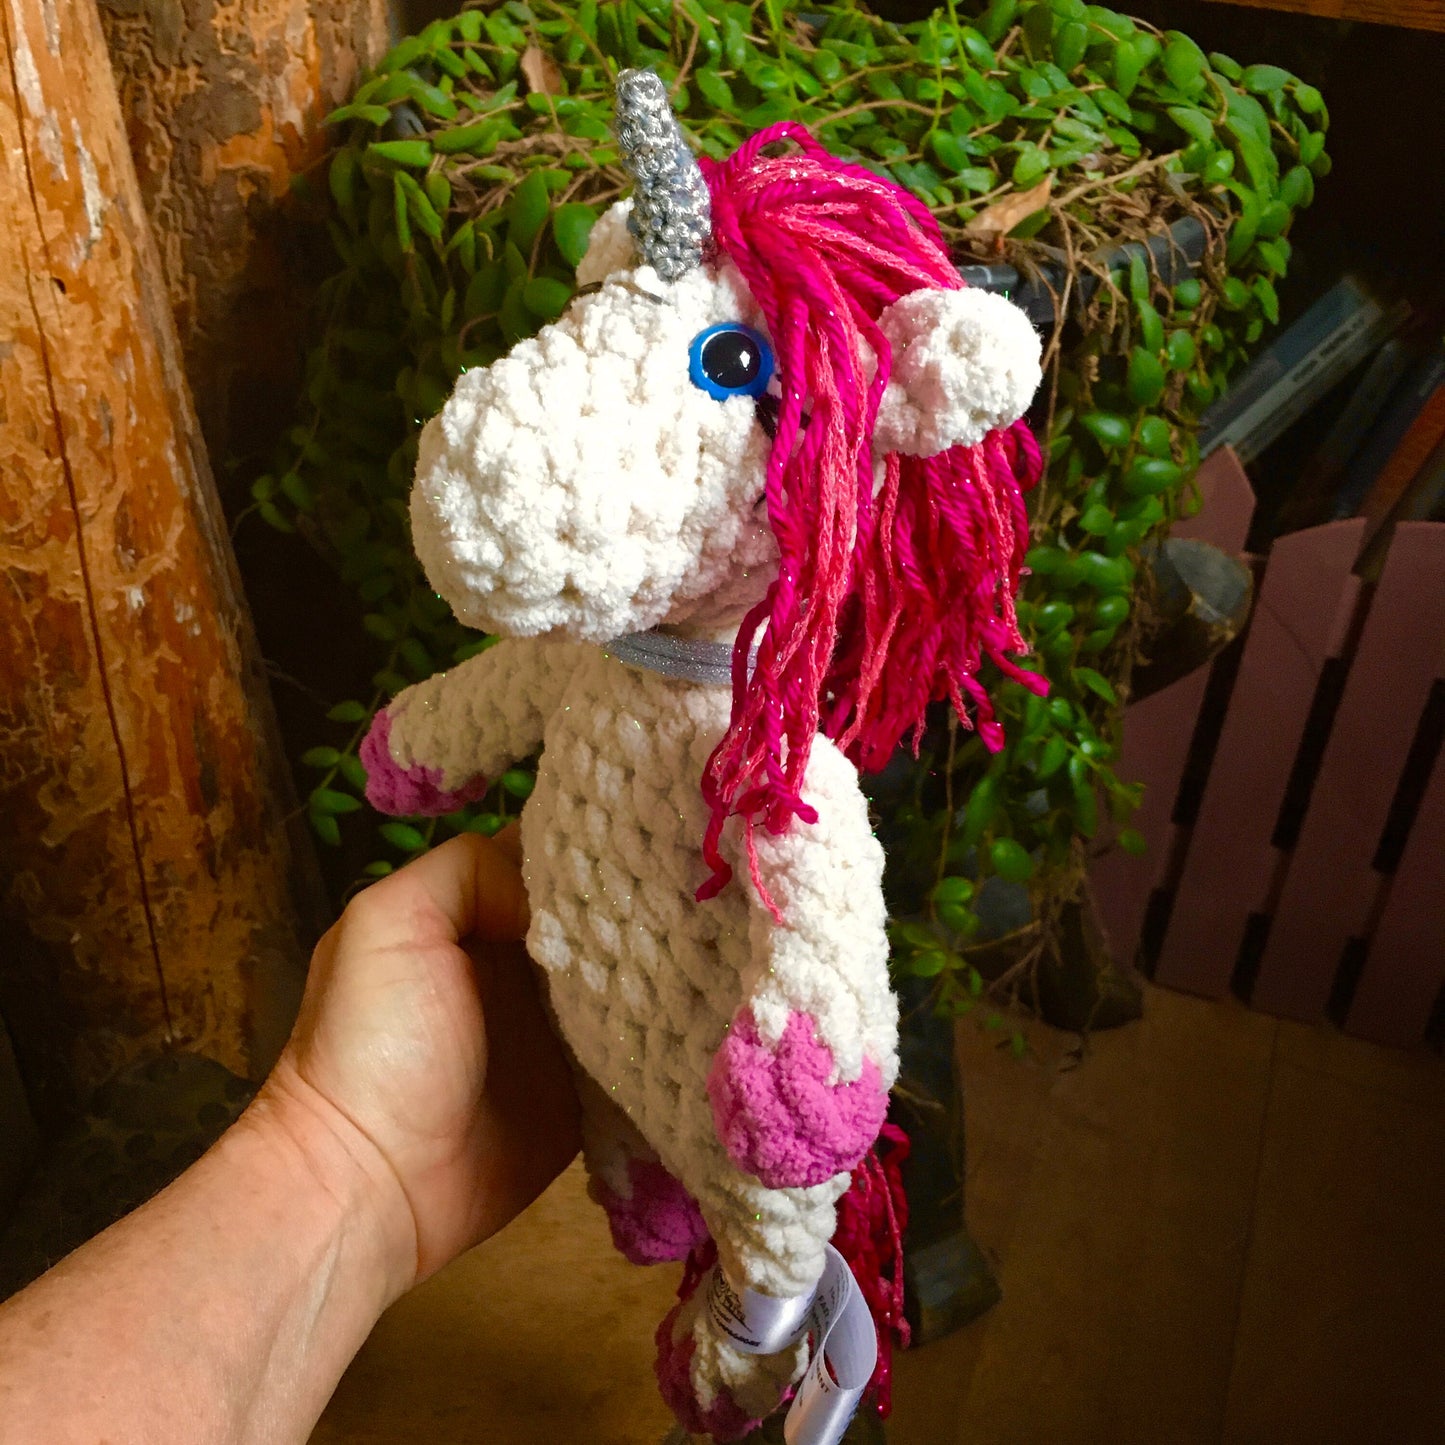 The little hair unicorn in cream and pink colors, handmade plush with sparkling wire bling-bling